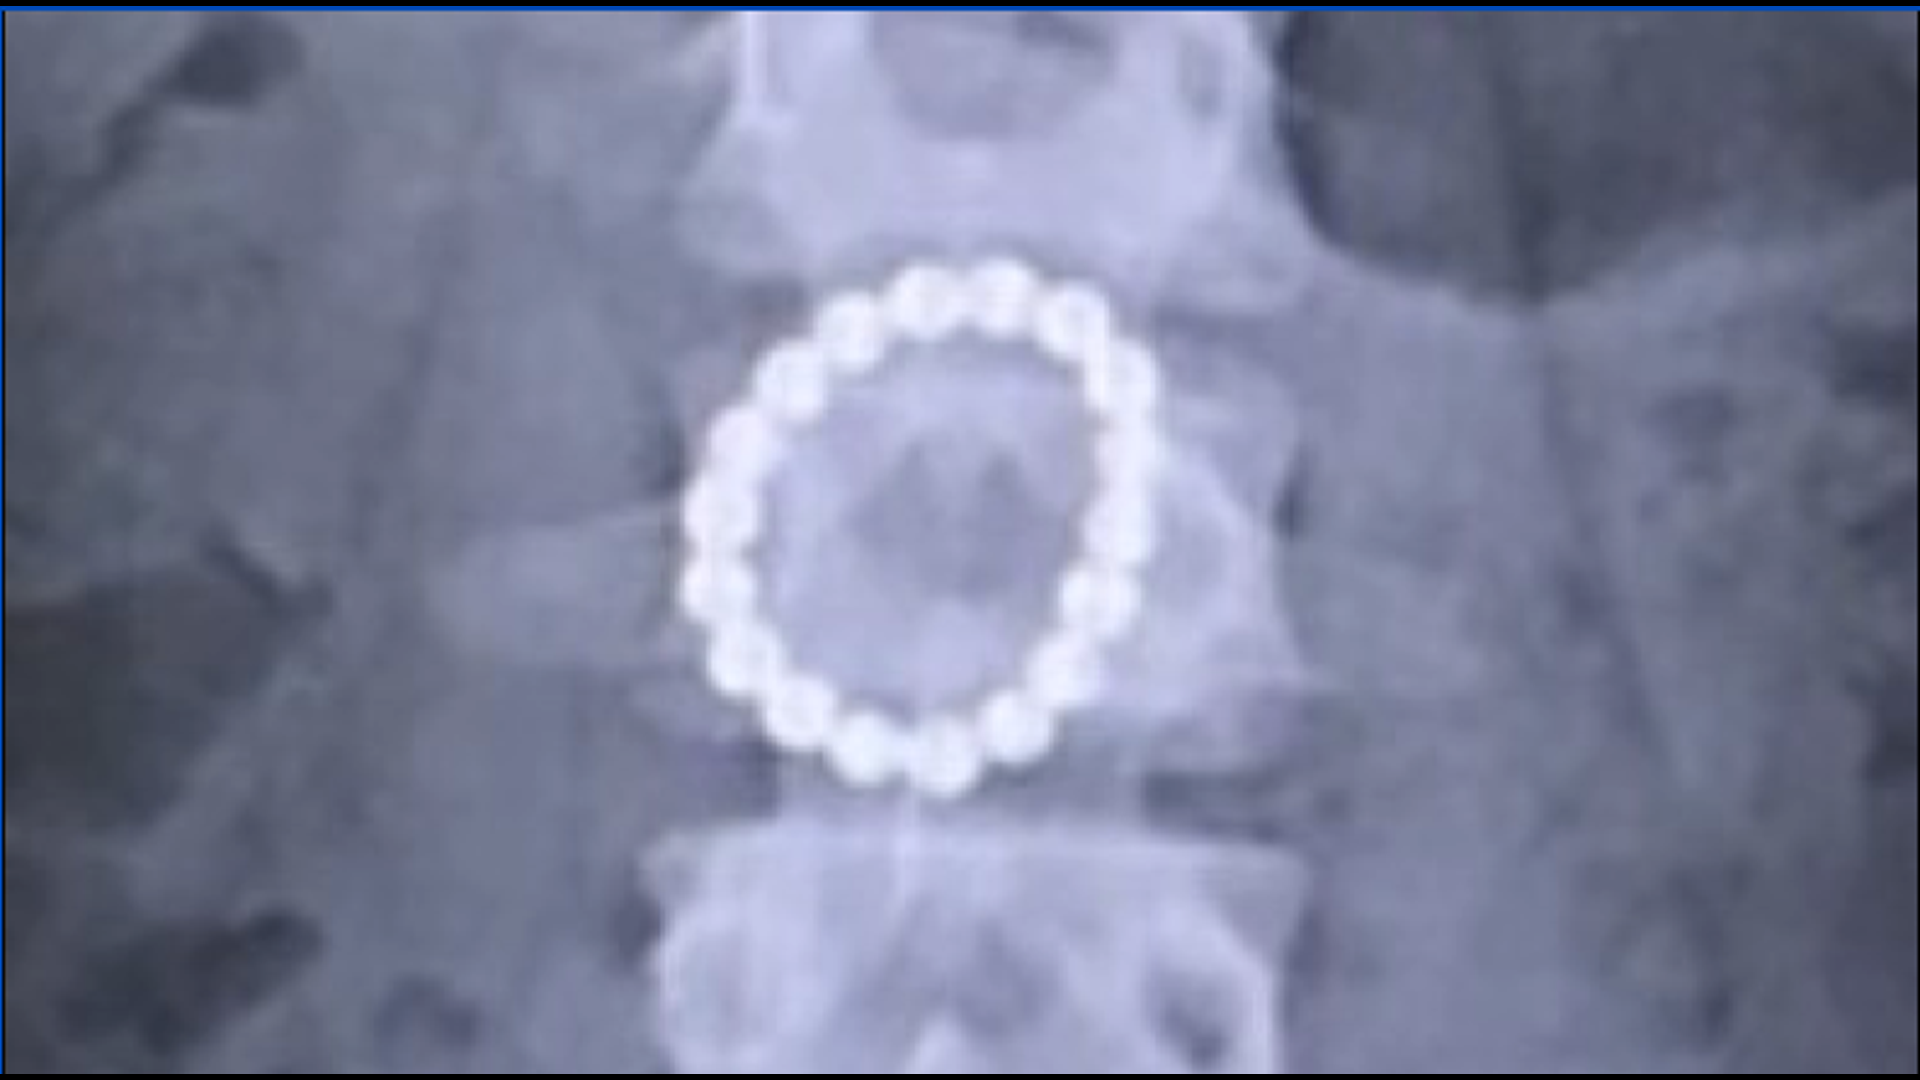 Little magnets are a big health hazard when swallowed